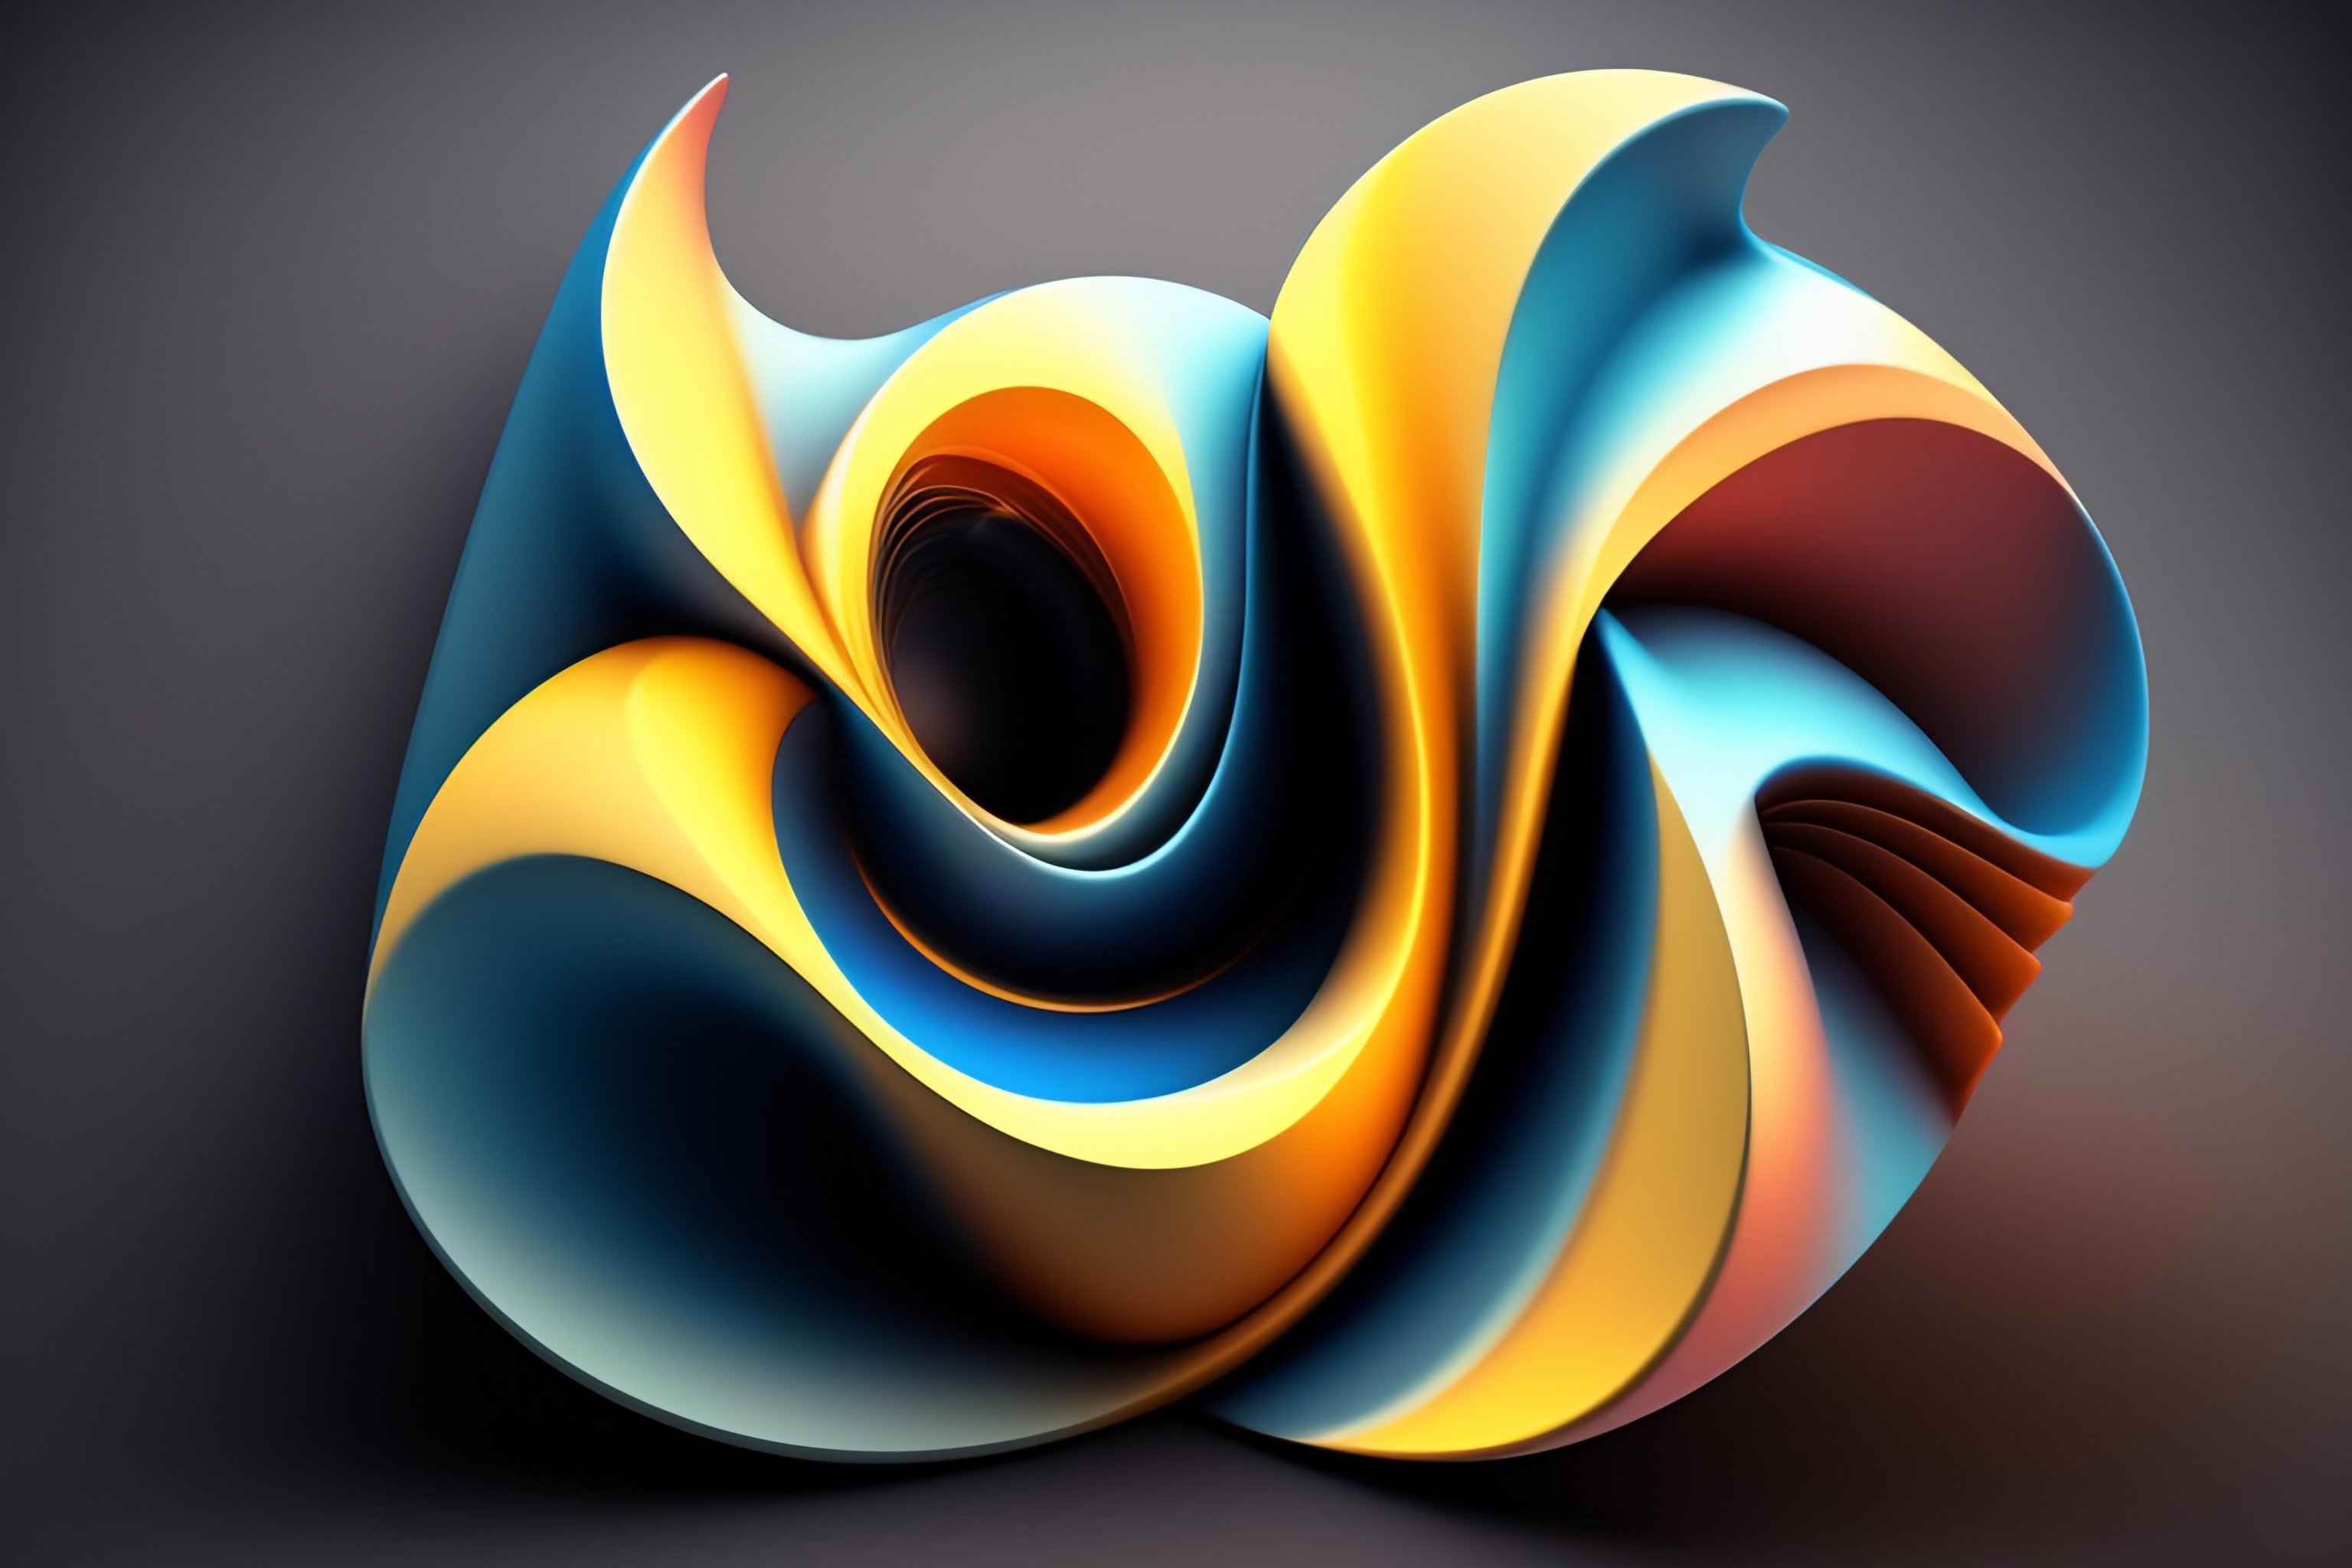 Lexica - Chic 3d design abstract